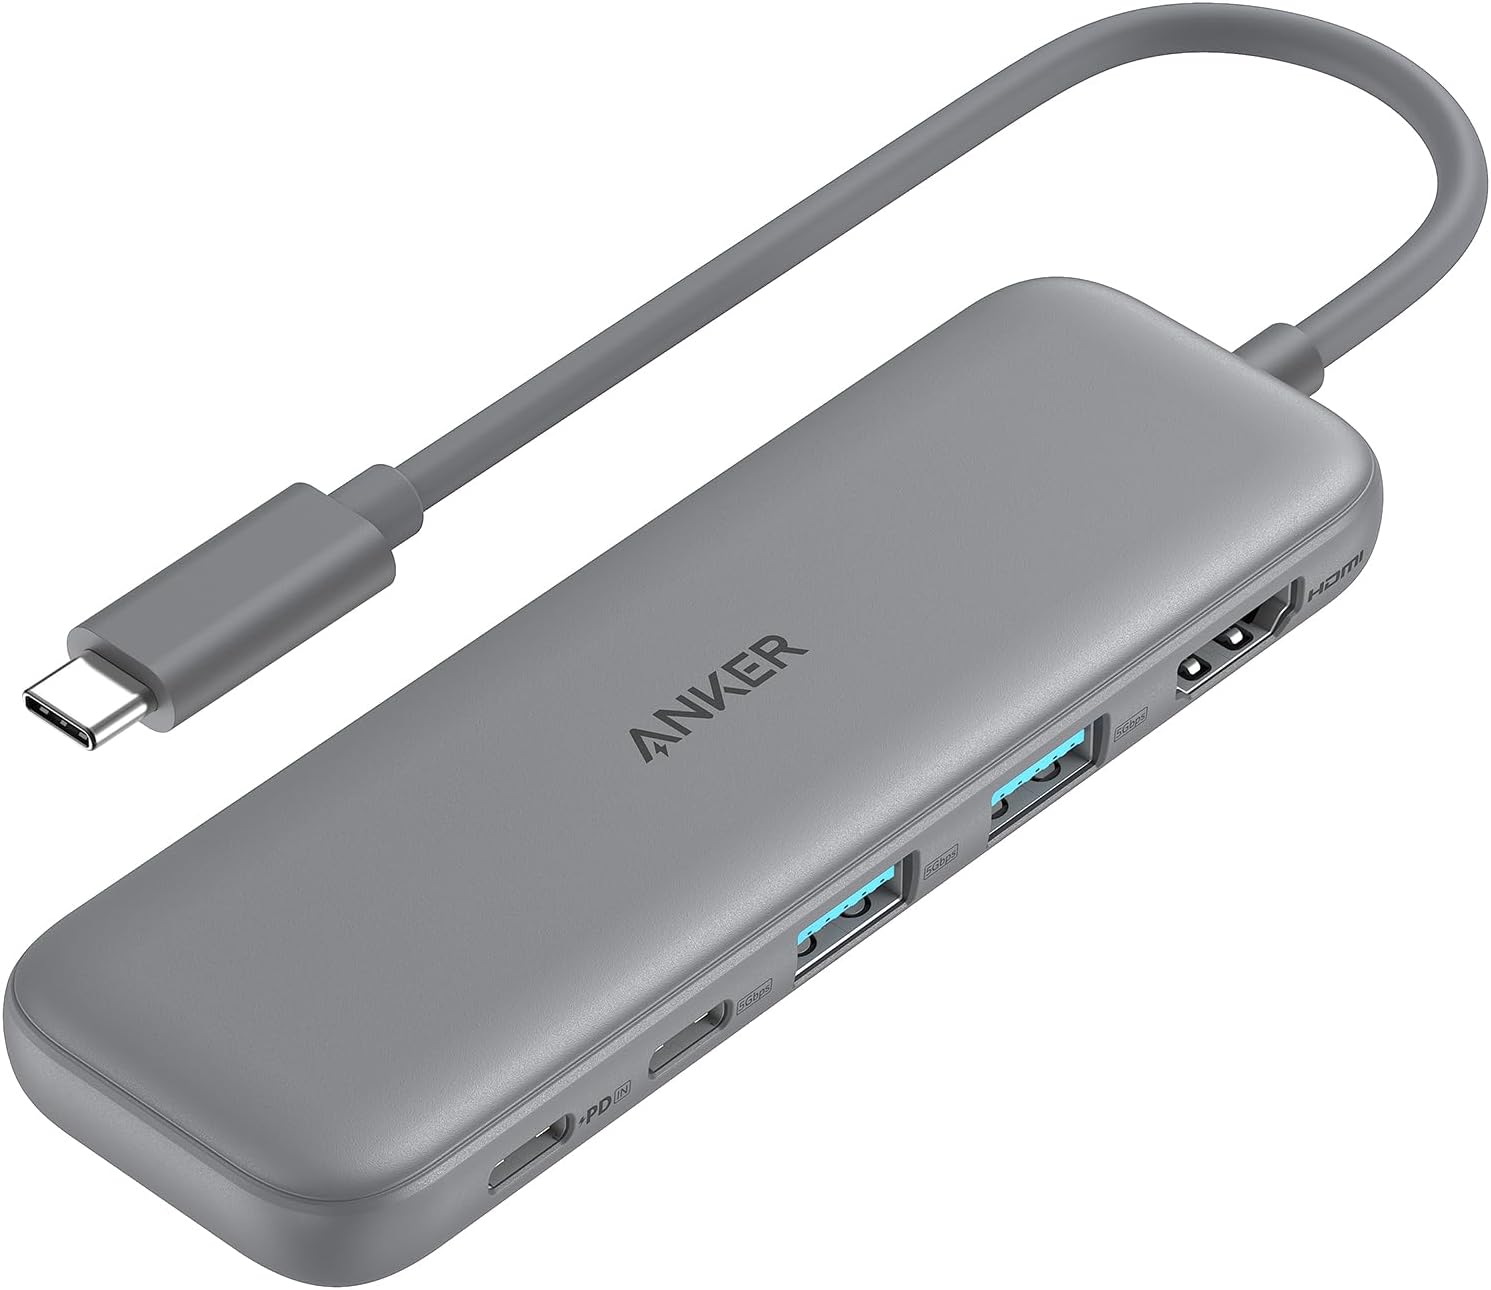 Anker 332 USB-C Hub (5-in-1) with 4K HDMI Display